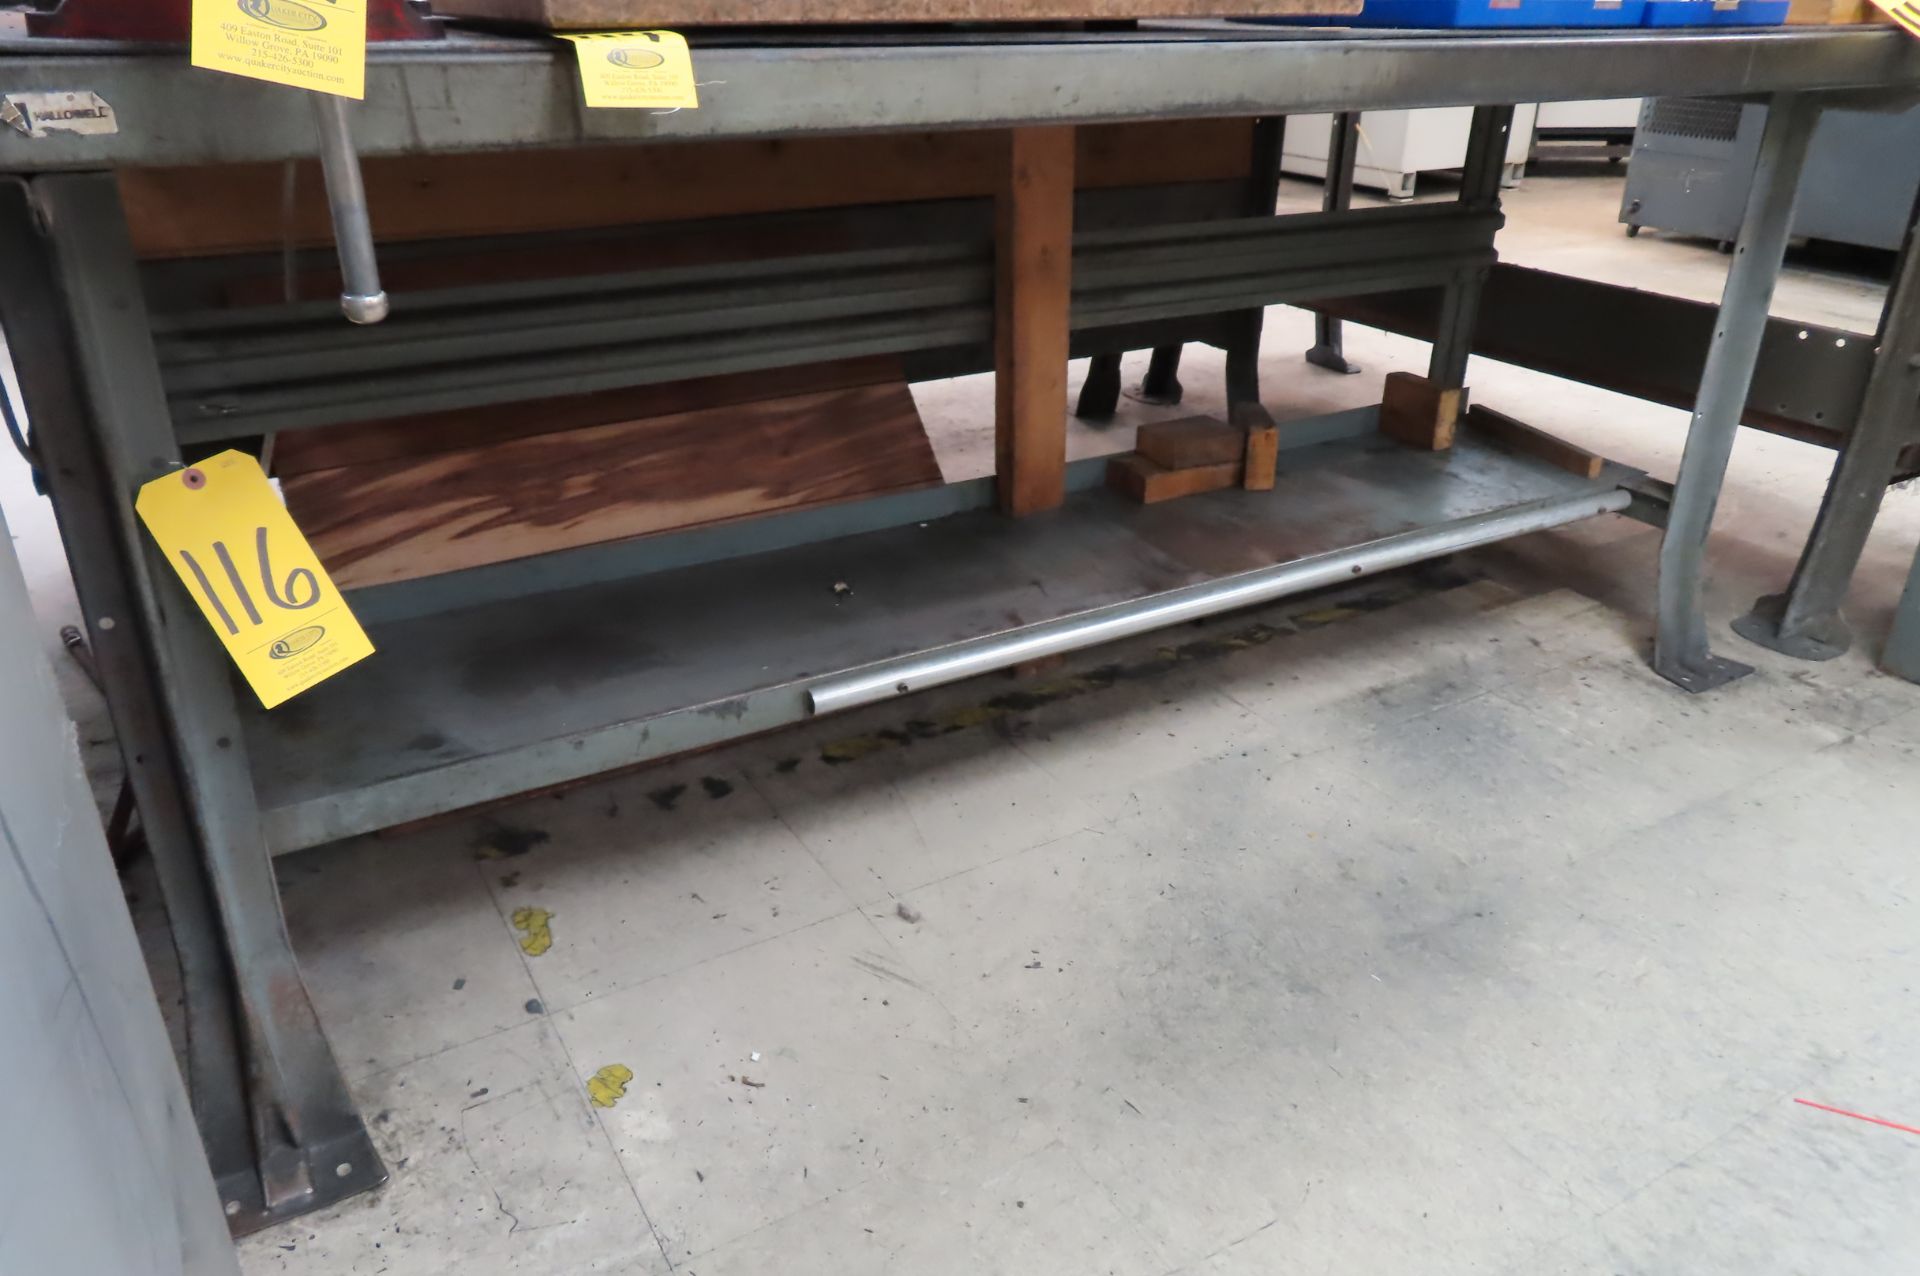 72 X 30 IN. METAL SHOP TABLE WITH UNDERSHELF AND LIGHT - Image 3 of 3